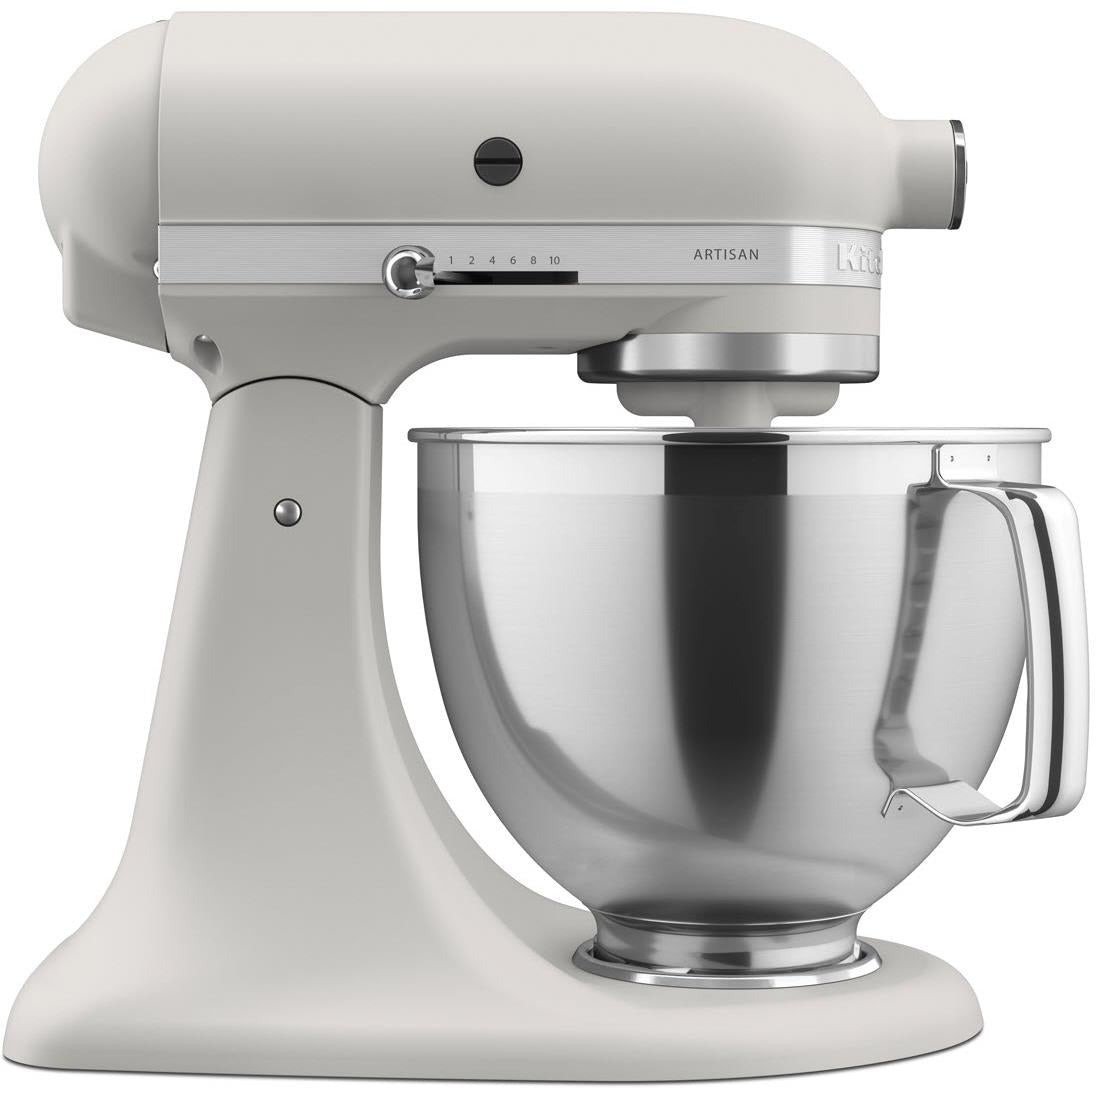 Stand mixer with bowl, 4.3L, with slicer accessory, Classic, Matte